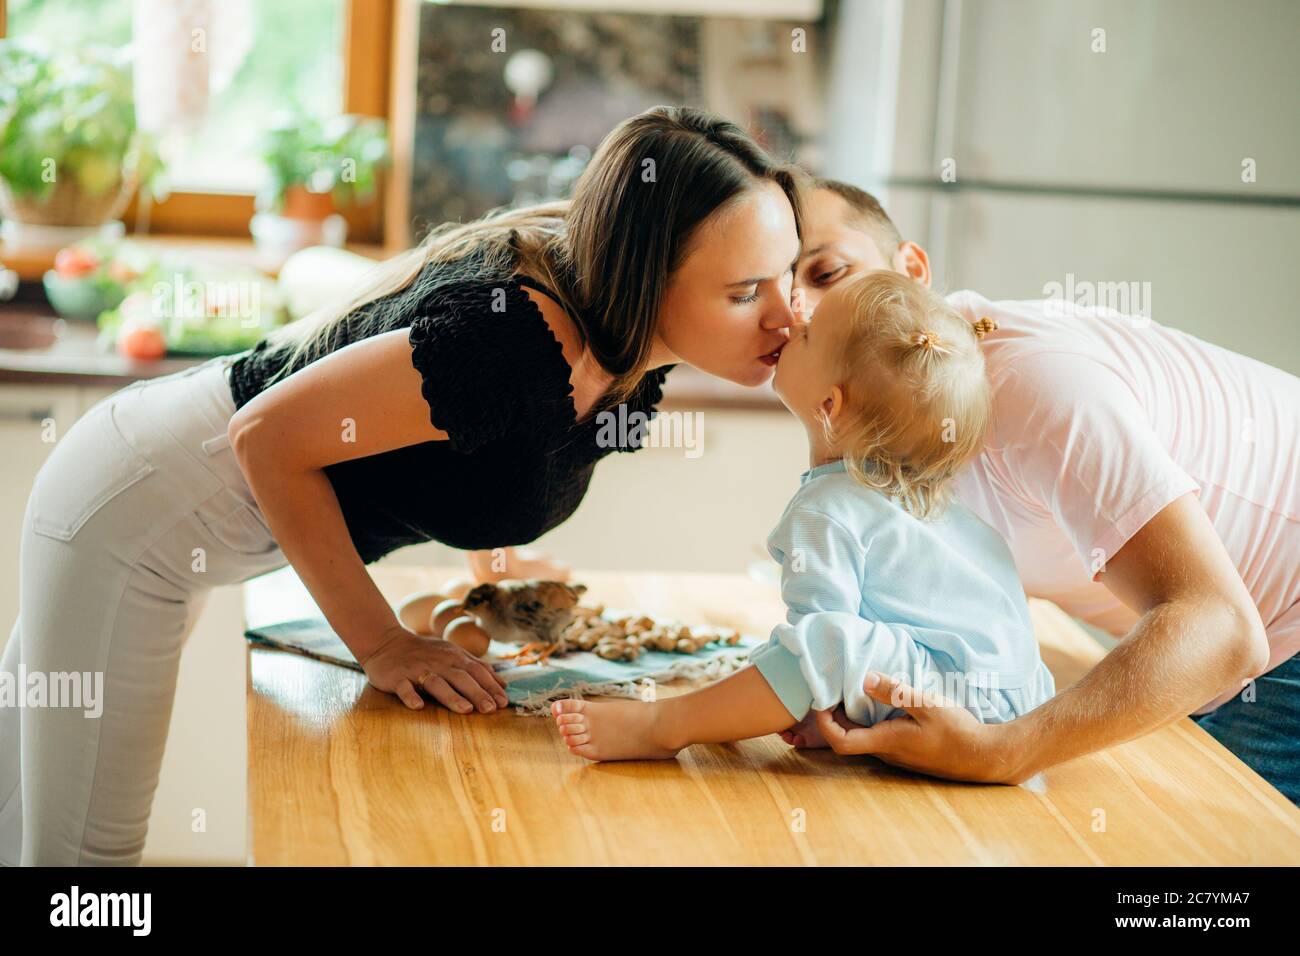 happy Parents giving their daughter a kiss. Stock Photo